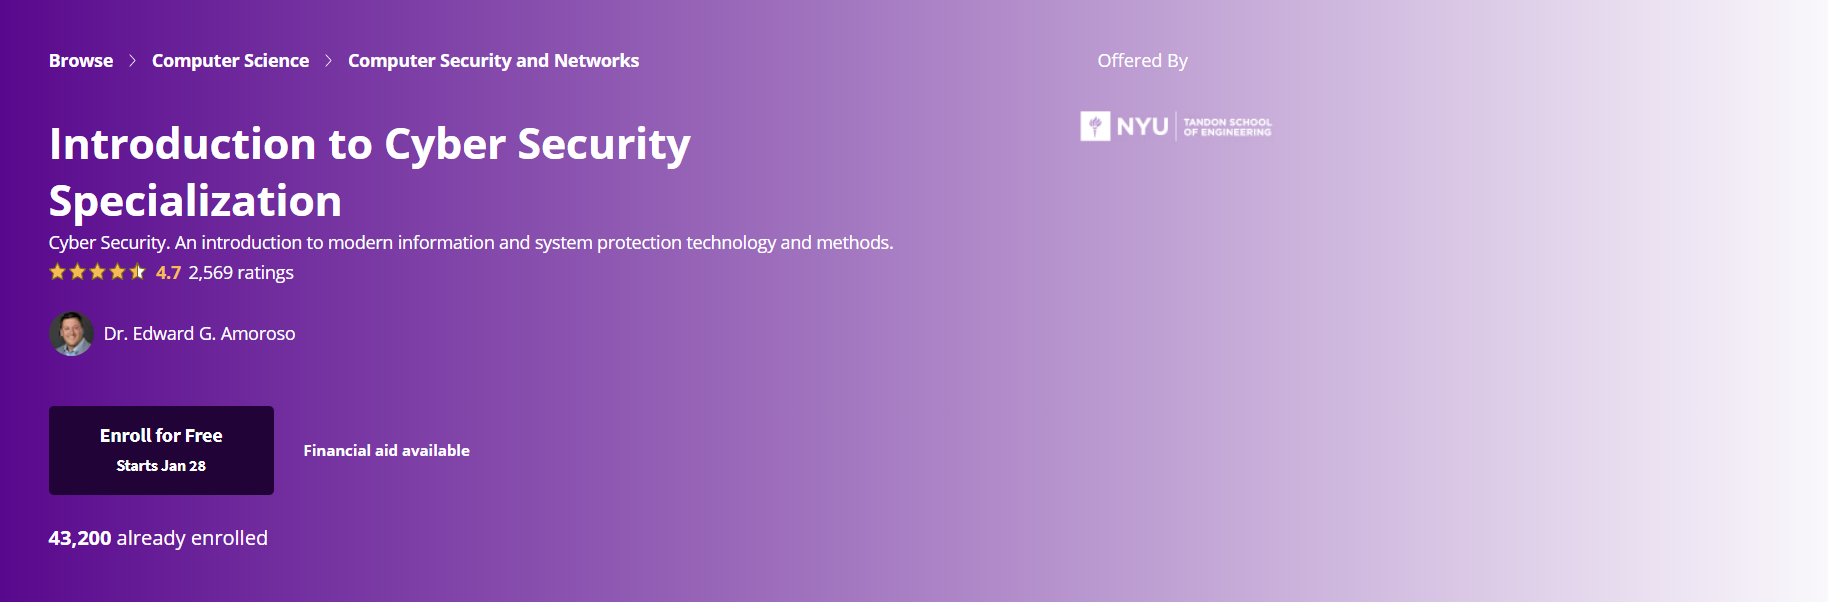 Introduction to Cyber Security Specialization from NYU (Coursera)